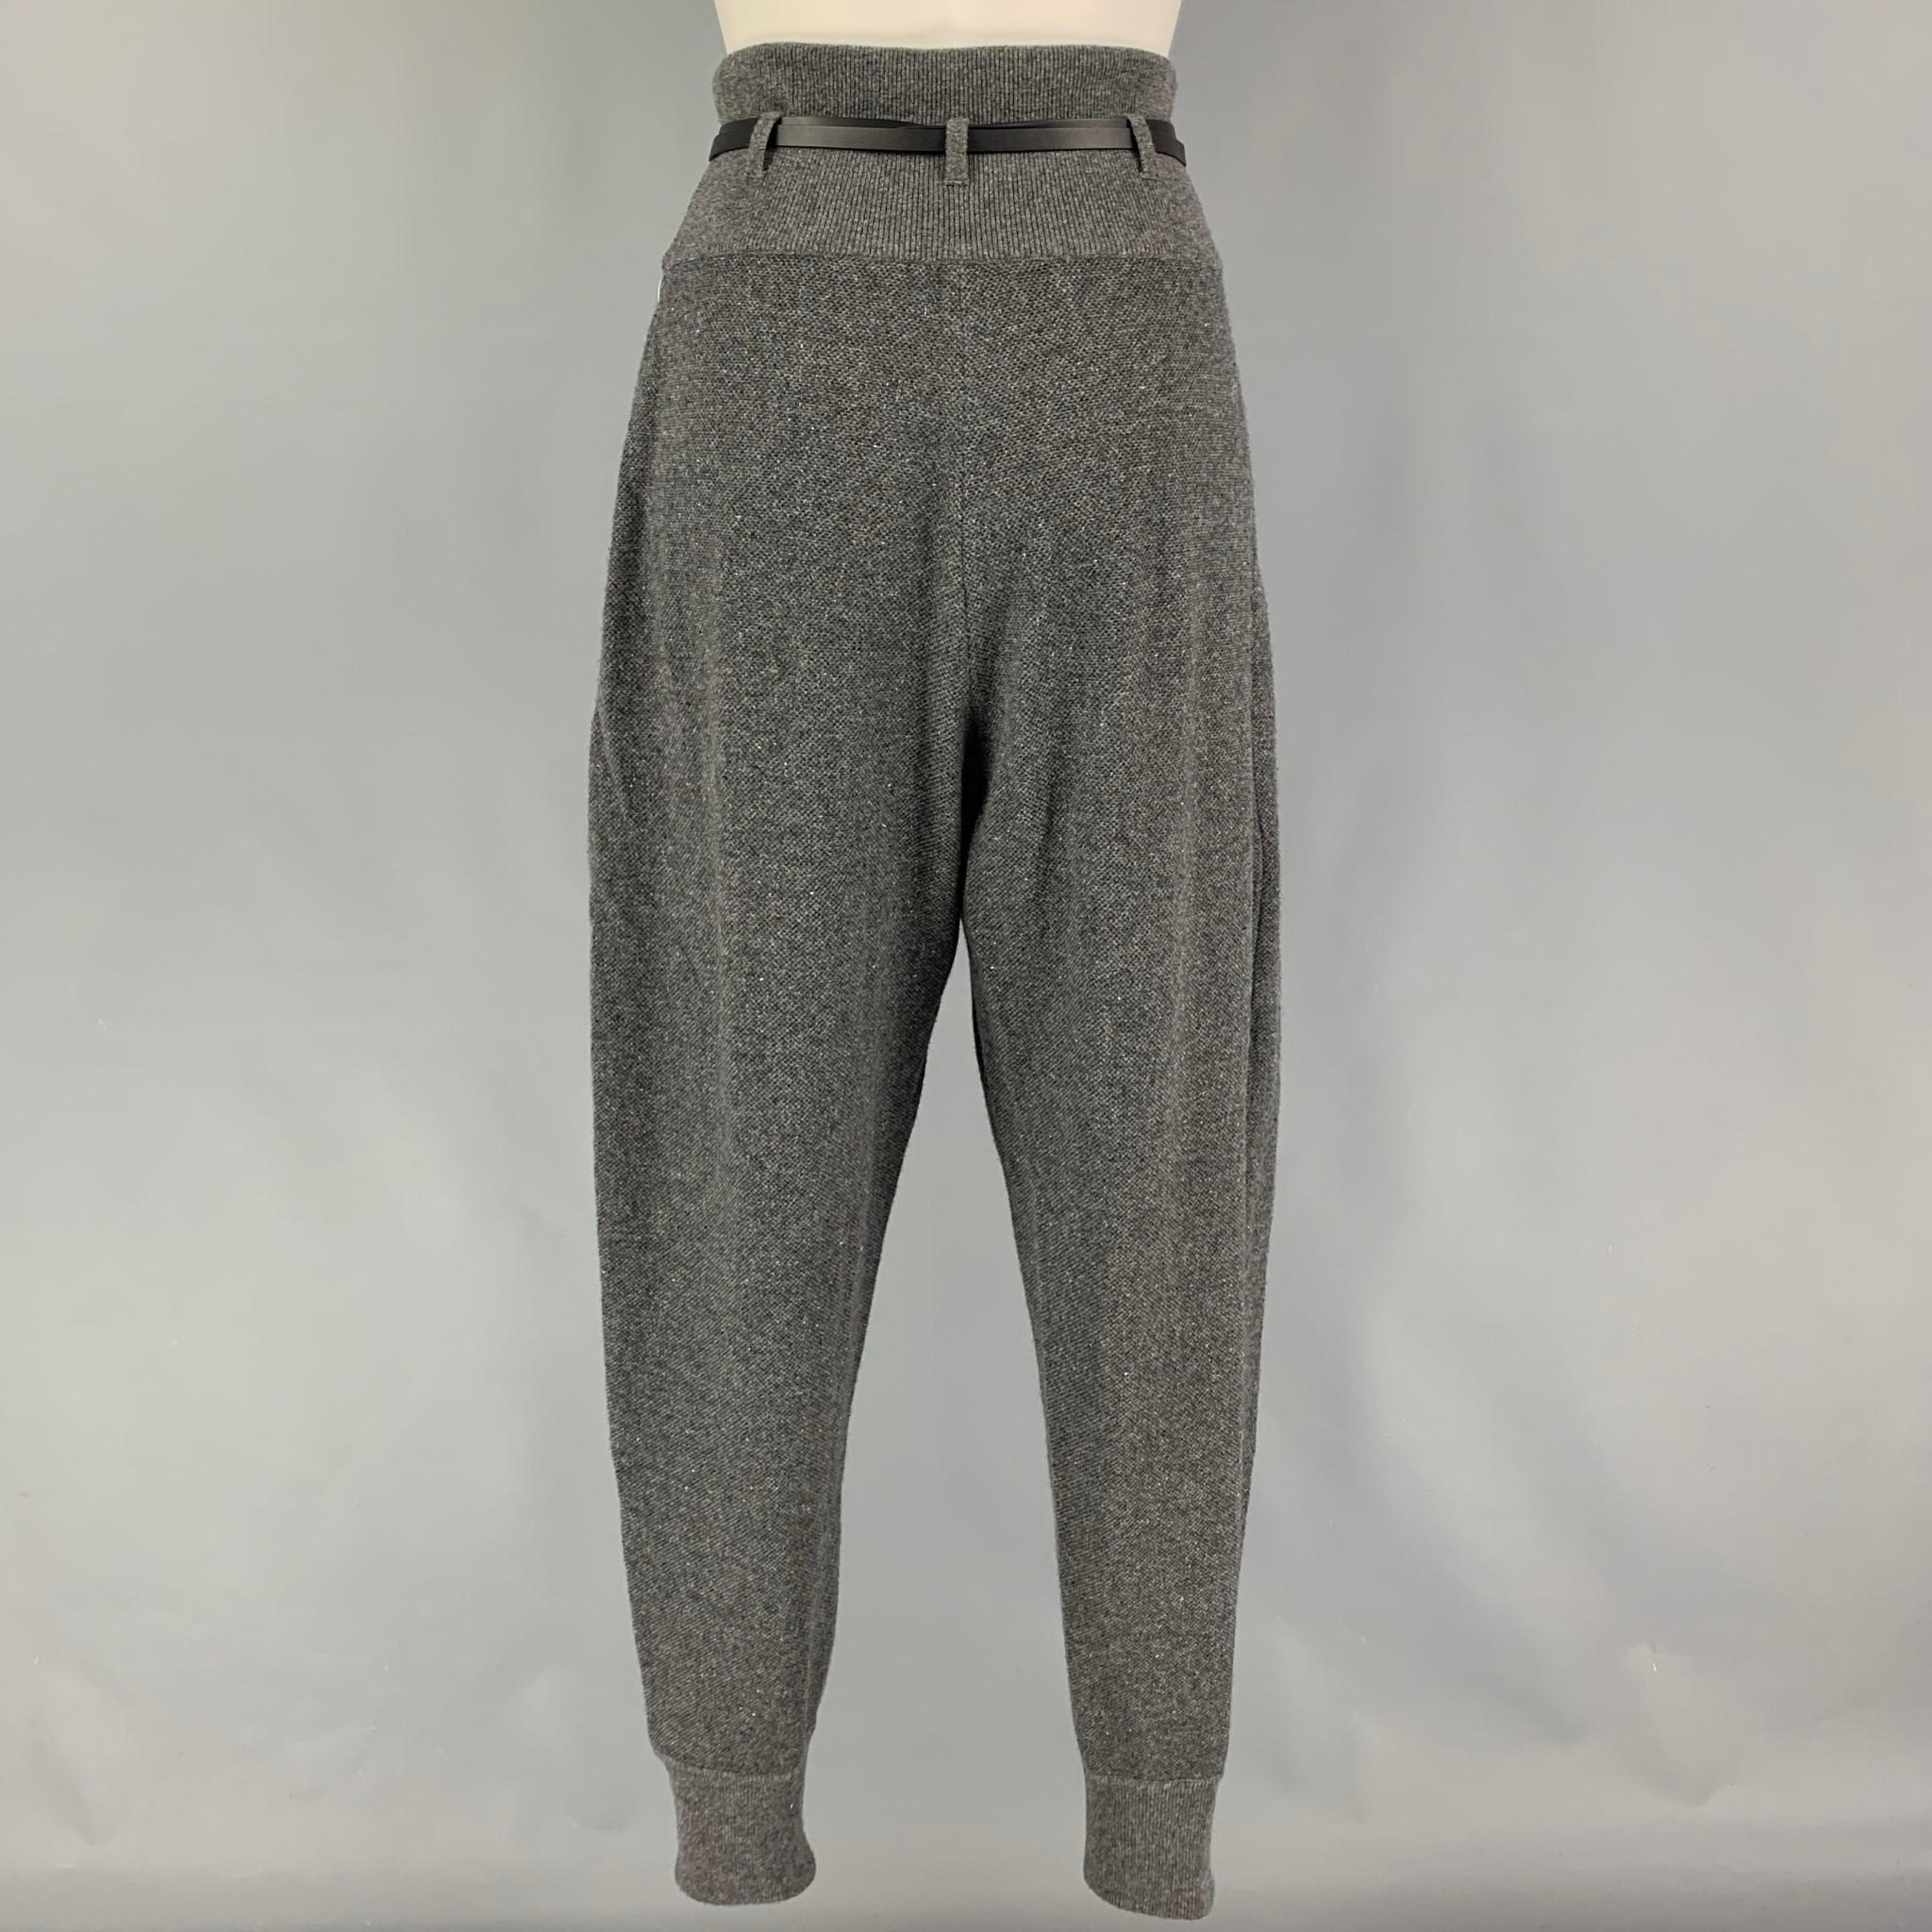 THE ROW pants comes in a grey cashmere / silk featuring a pleated style, high waist, side slit pockets, anda black belt detail. 

Very Good Pre-Owned Condition.
Marked: XS
Original Retail Price: $1,360.00

Measurements:

Waist: 26 in.
Rise: 16